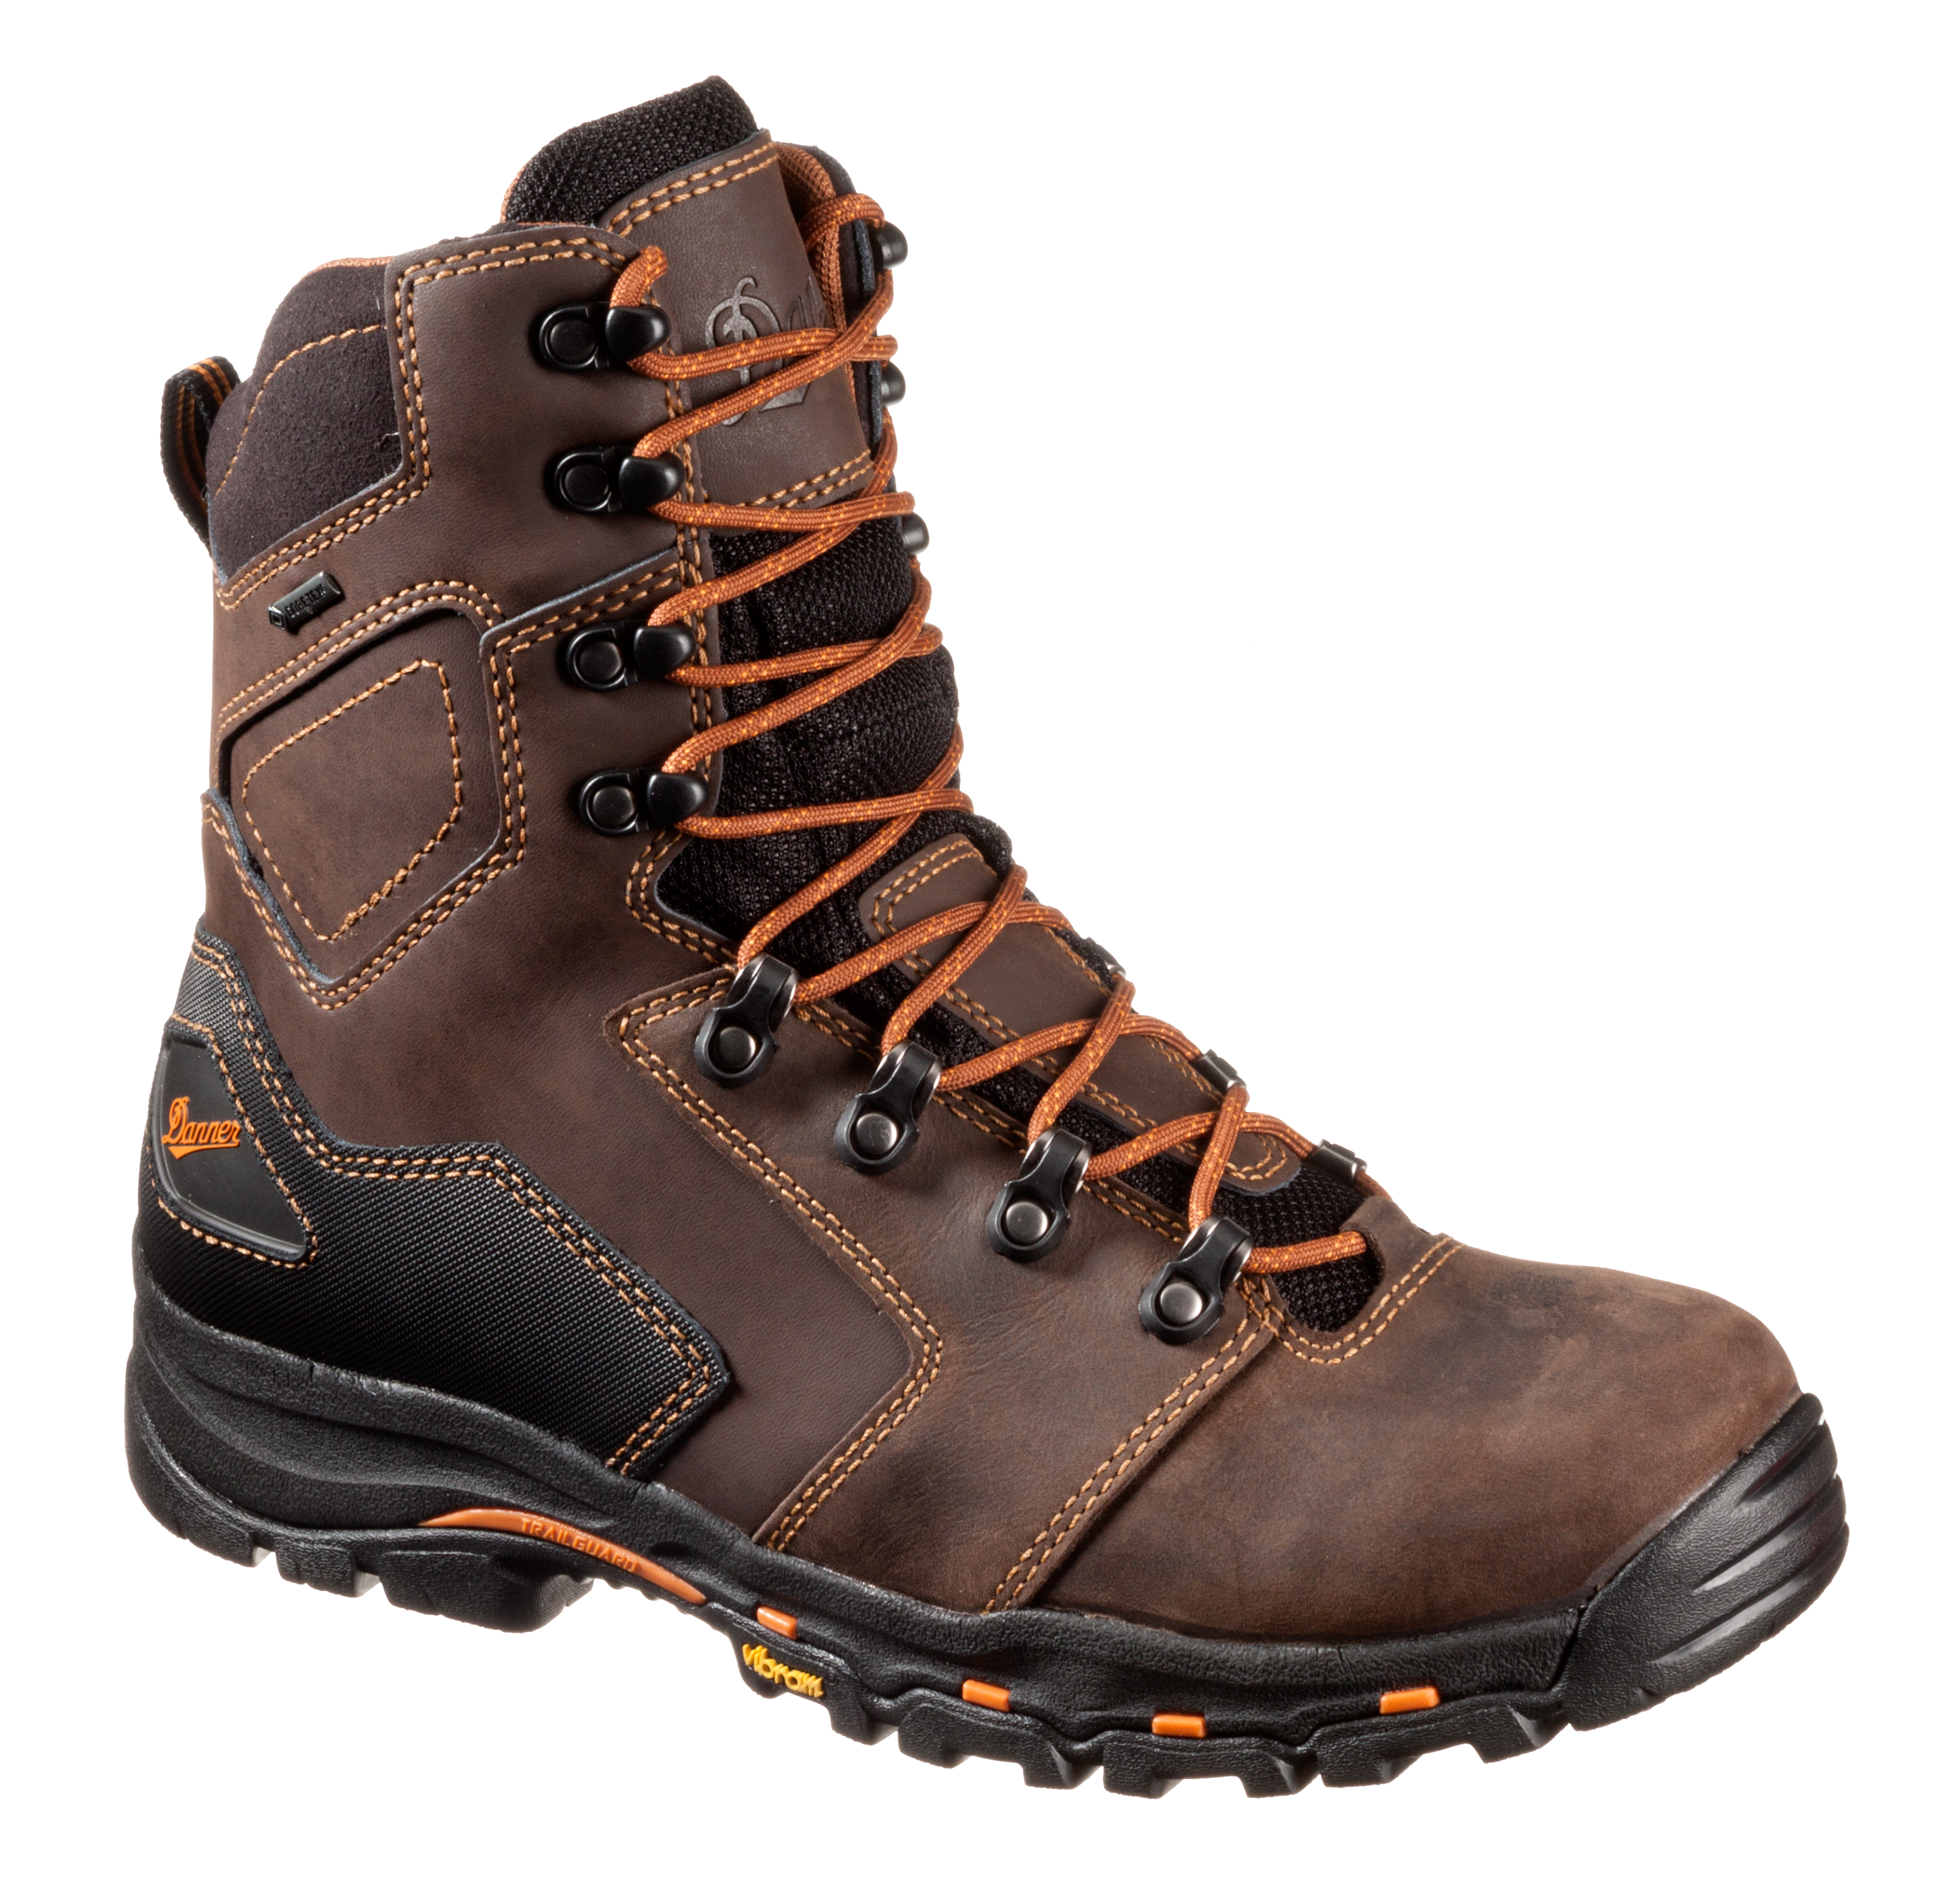 Danner Vicious GORE-TEX Work Boots for Men - Brown - 11.5 W